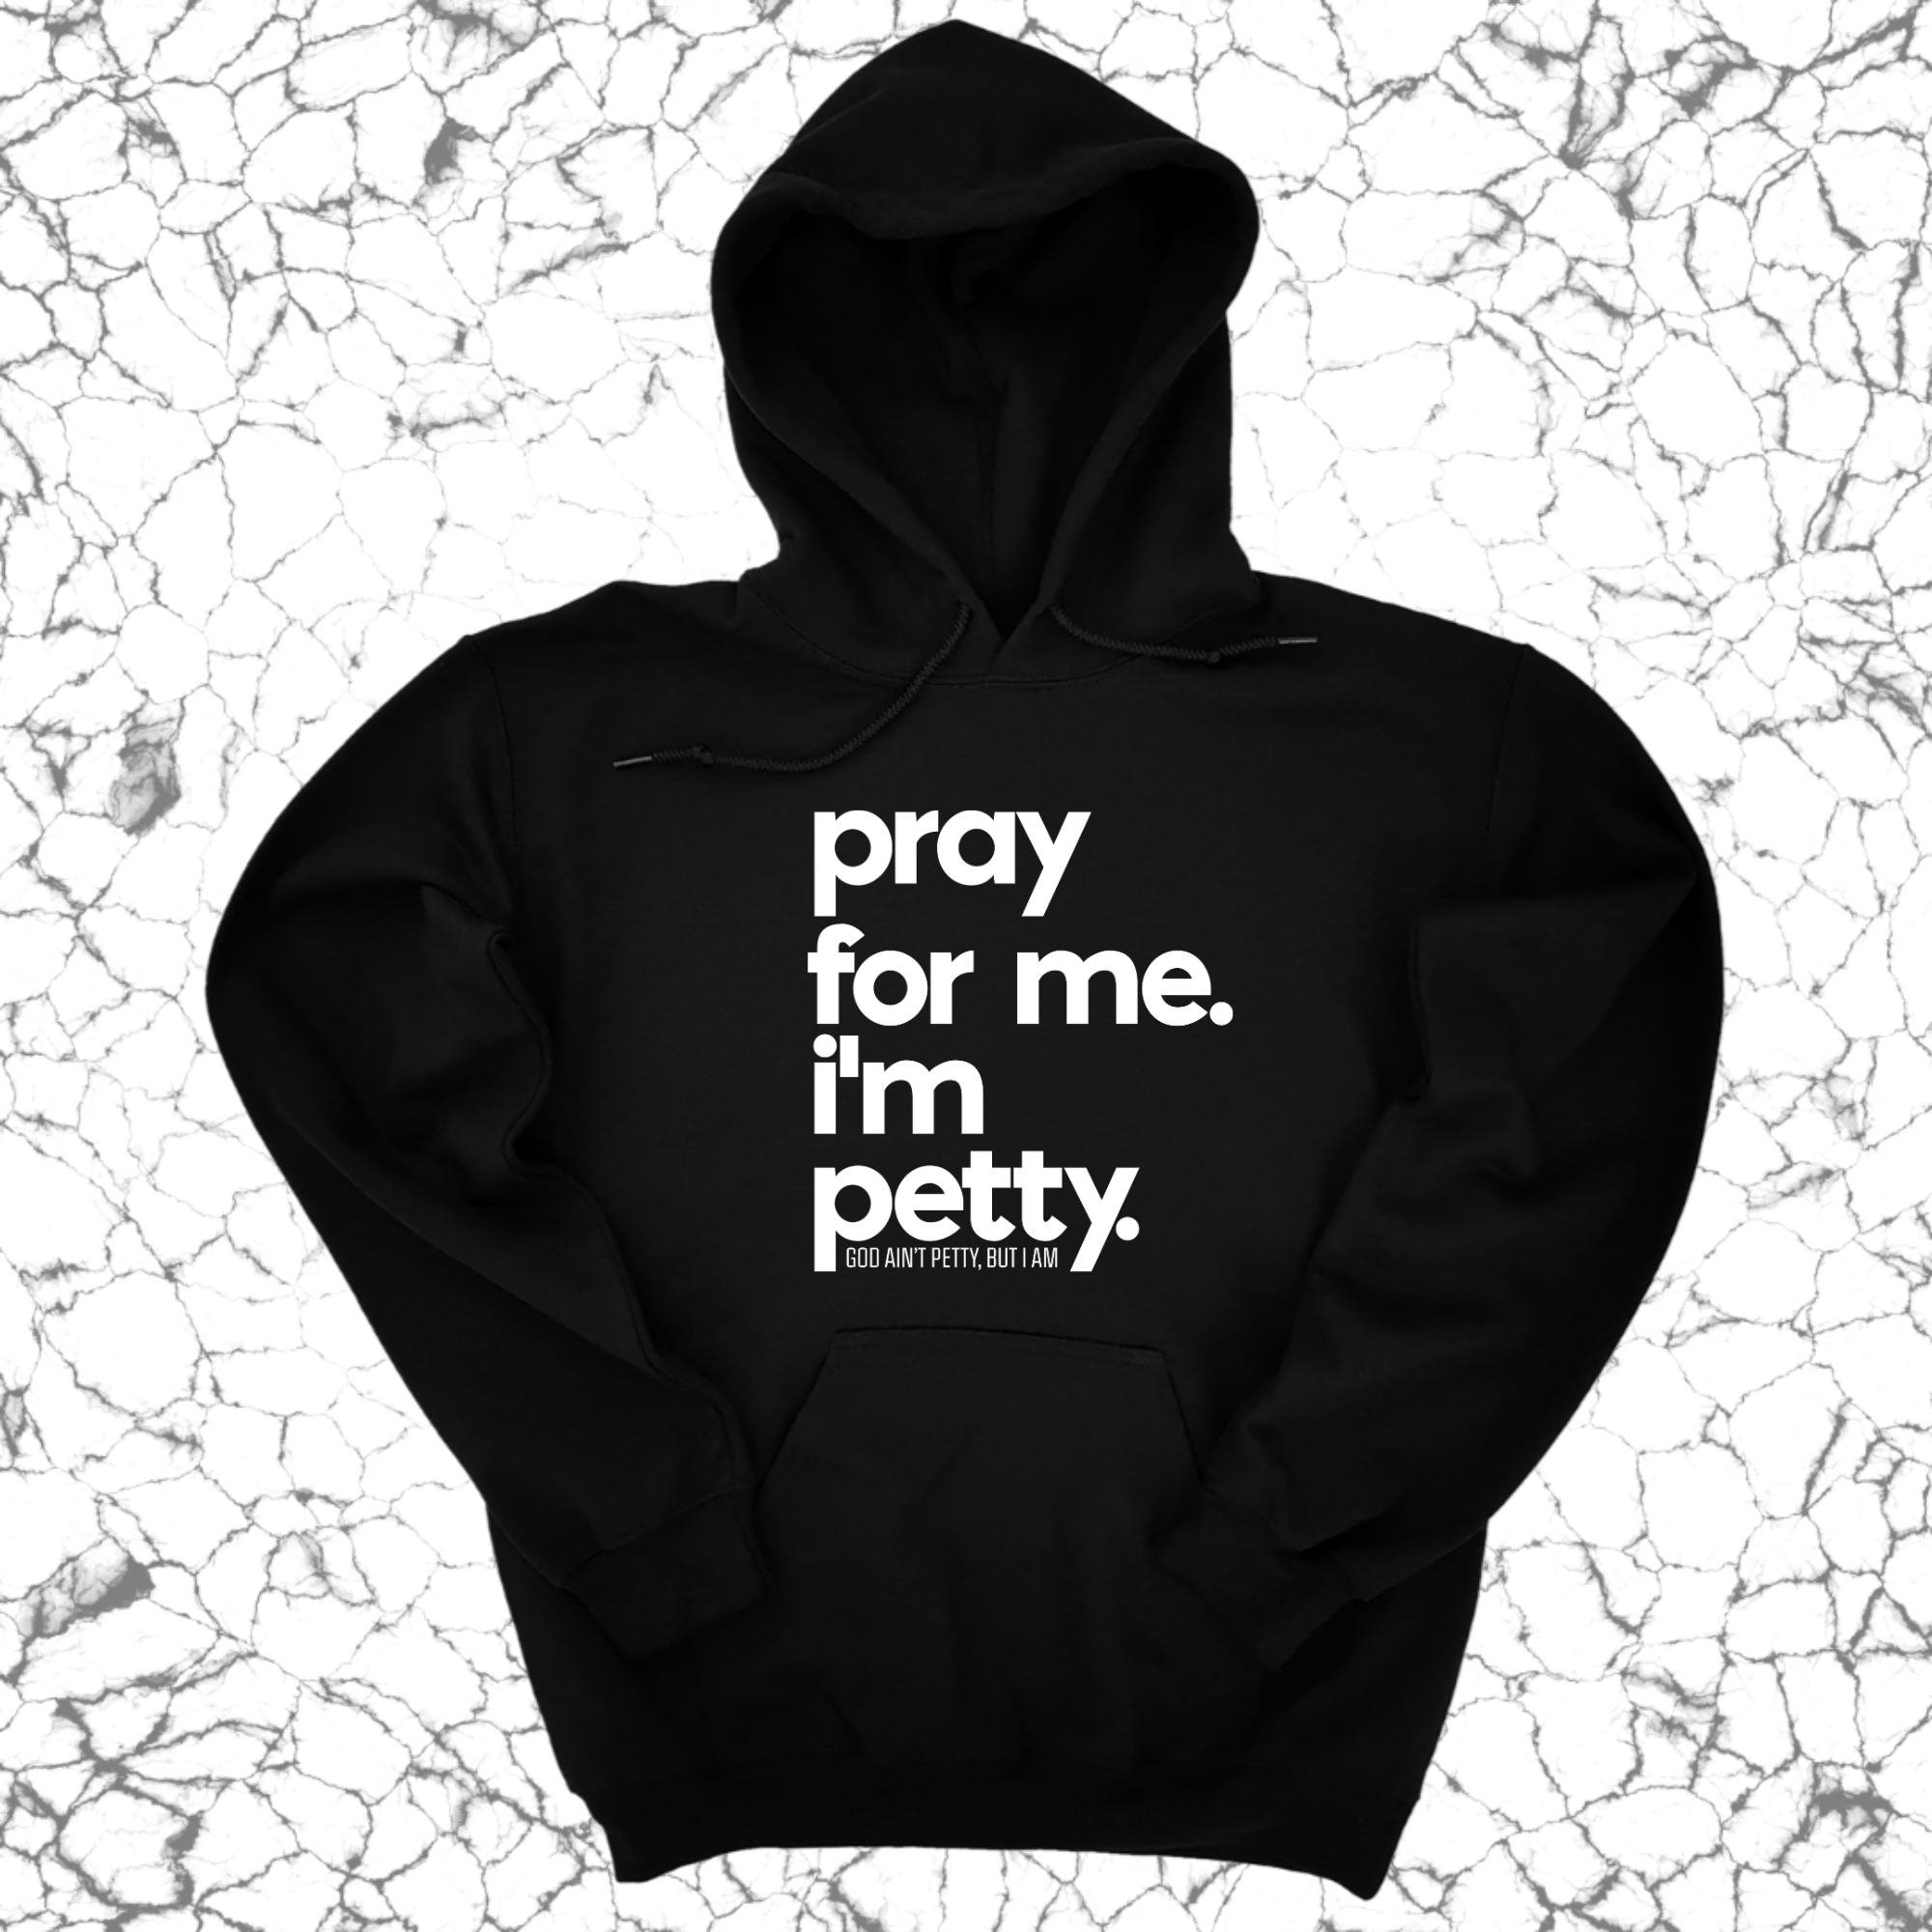 IMPERFECT -PRAY FOR ME I'M PETTY HOODIE BLACK/WHITE 2XL-The Original God Ain't Petty But I Am